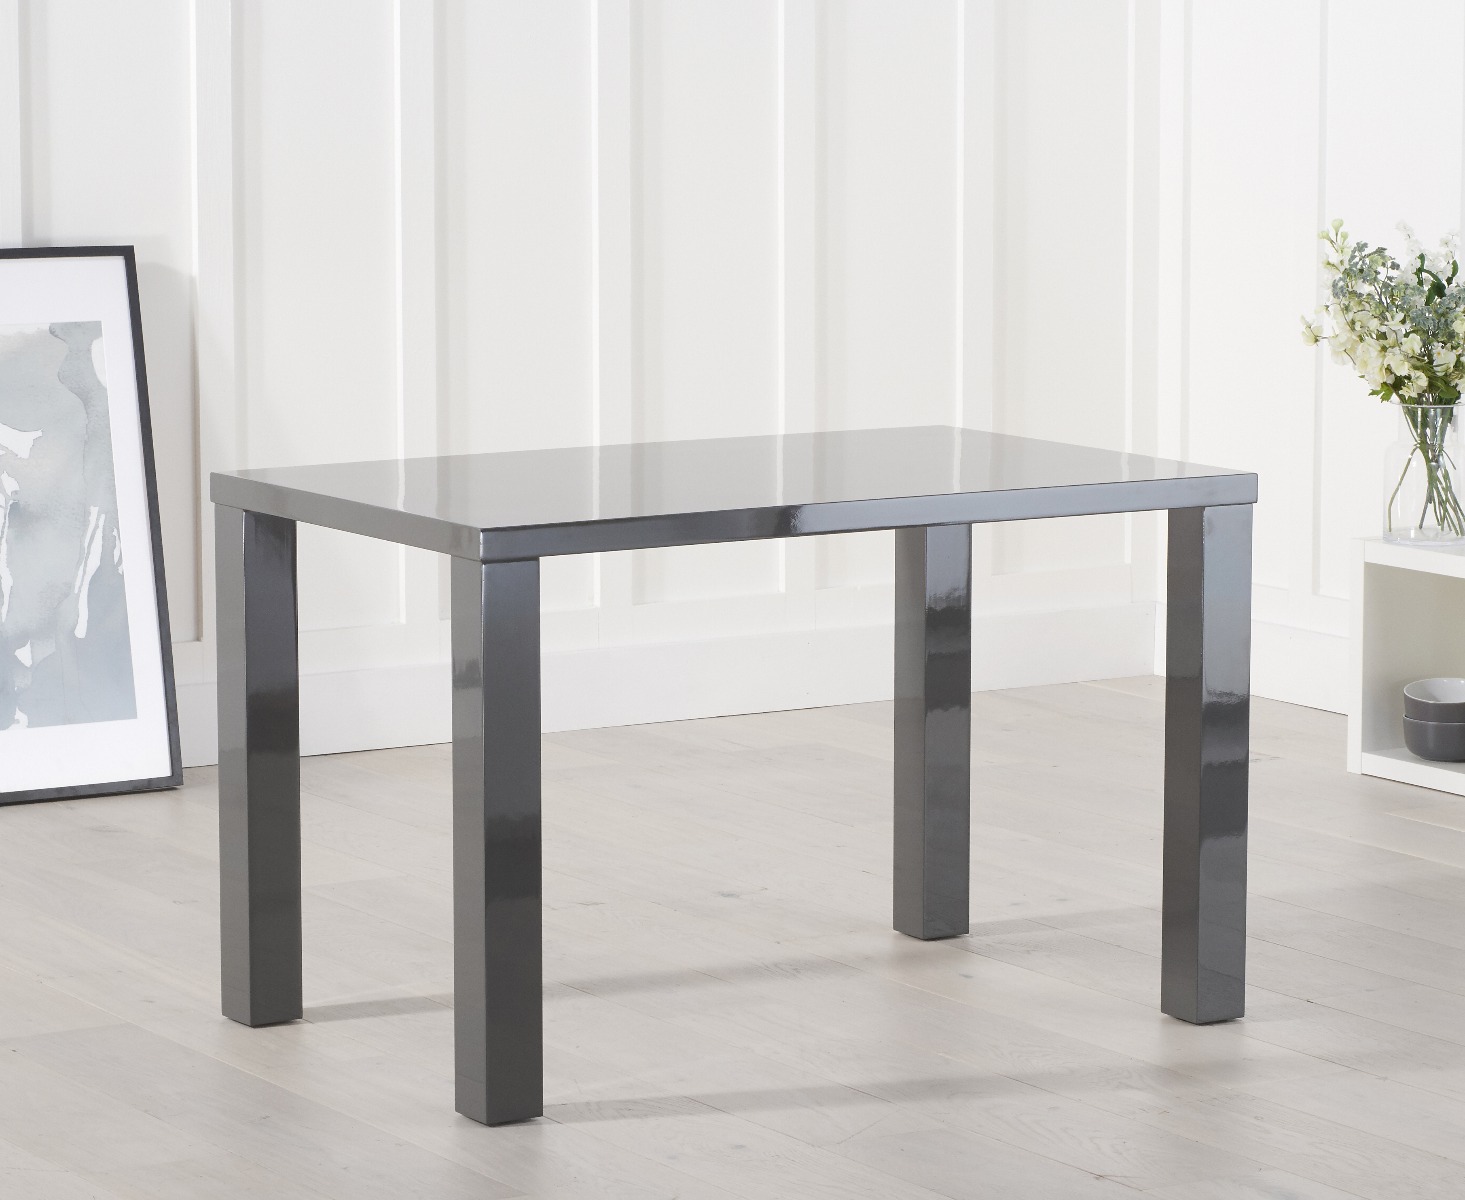 Photo 5 of Atlanta 120cm dark grey high gloss dining table with 6 grey gianni chairs